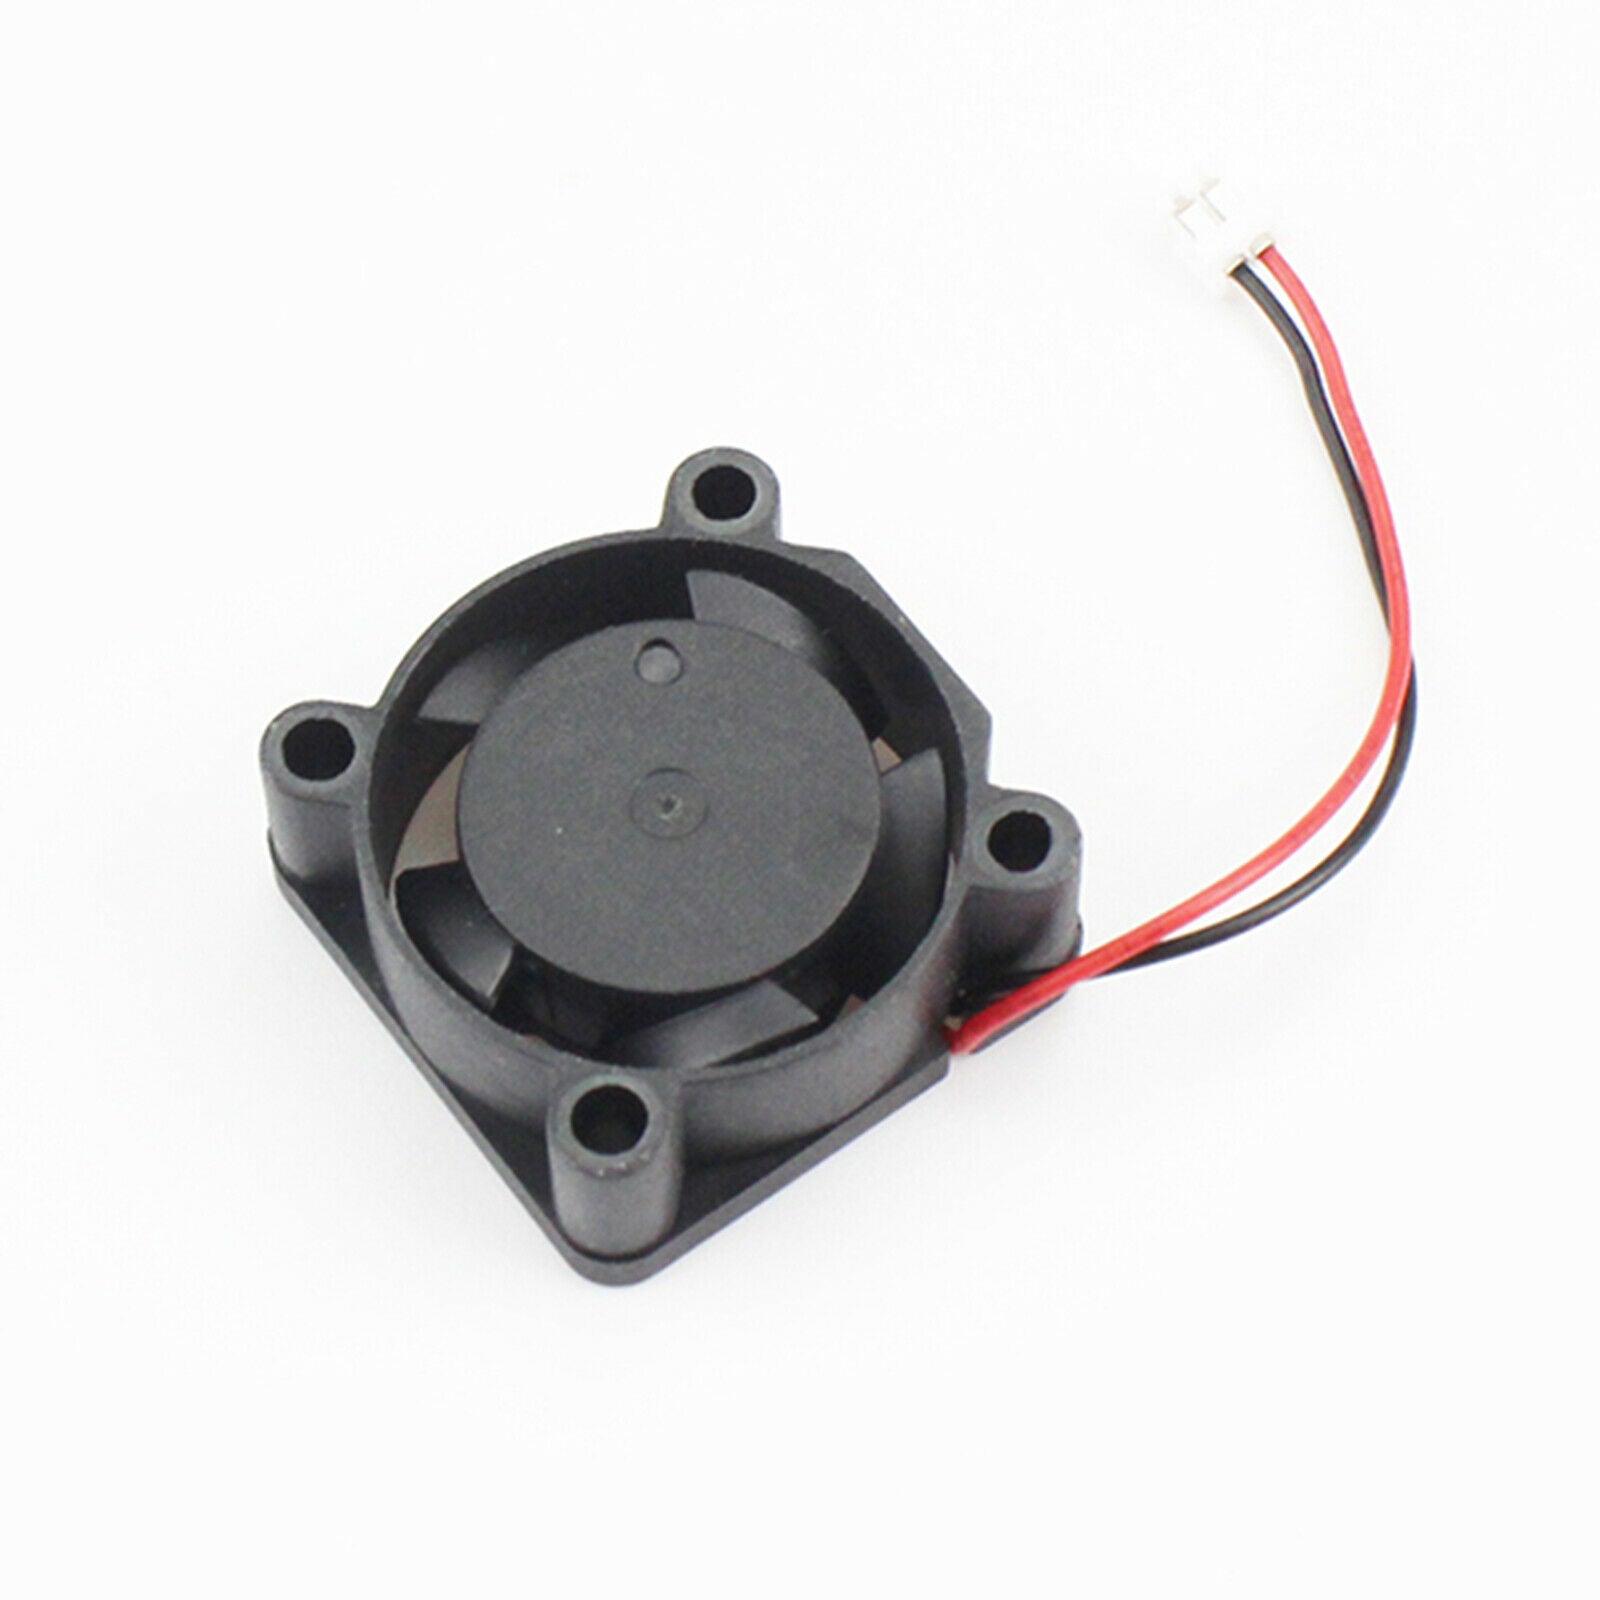 Motor Heat Sink Cooling Fan for WLTOYS 104001 RC Car Buggy Truck Replaces